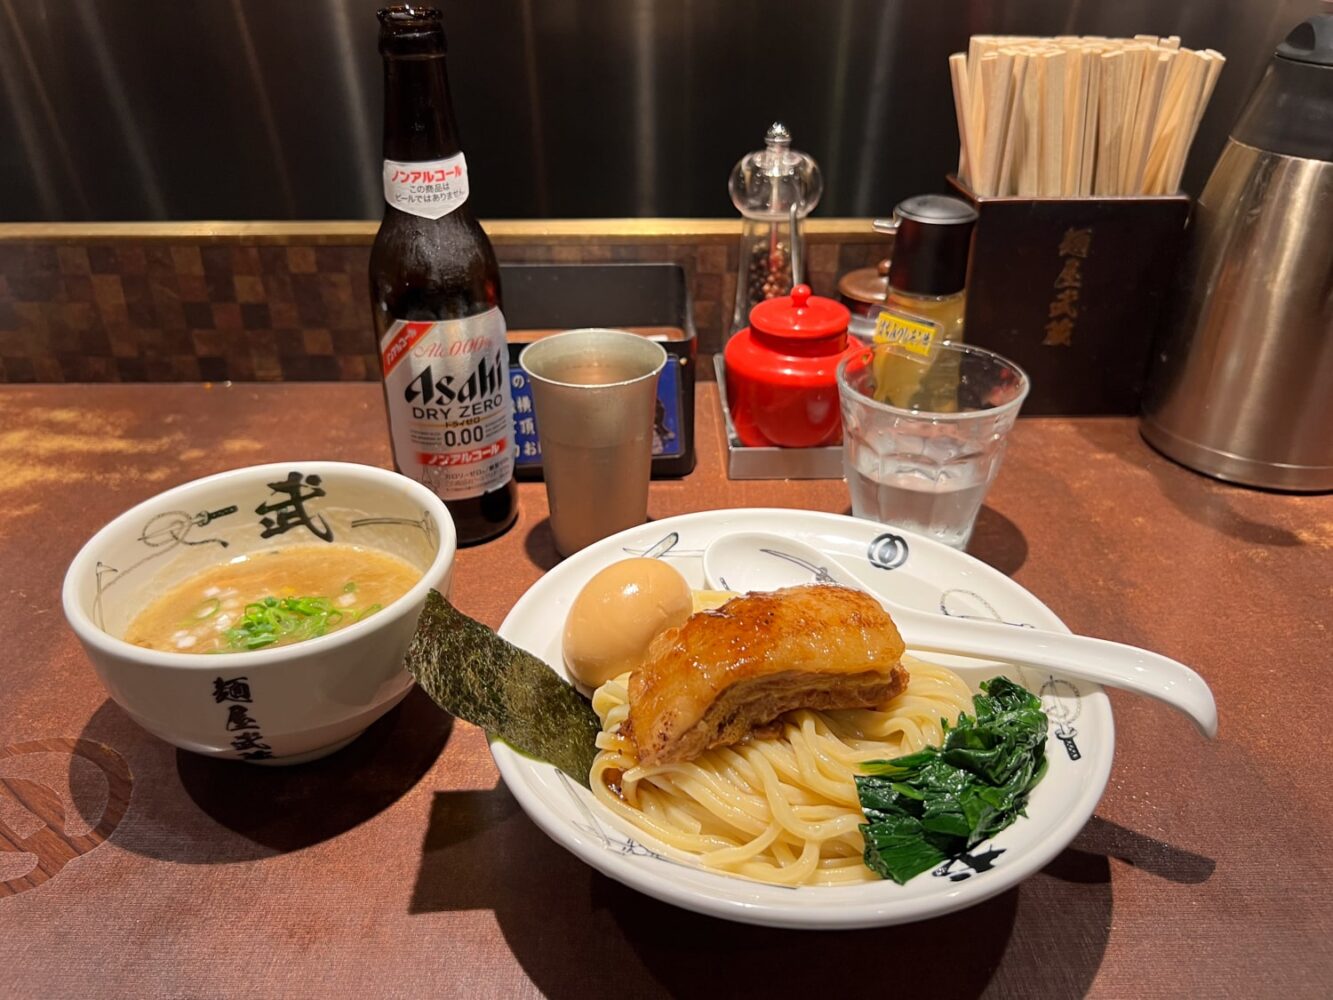 Japanese meal featuring Tsukemen Ramen noodles with side dish of dipping sauce and an Asahi beer.